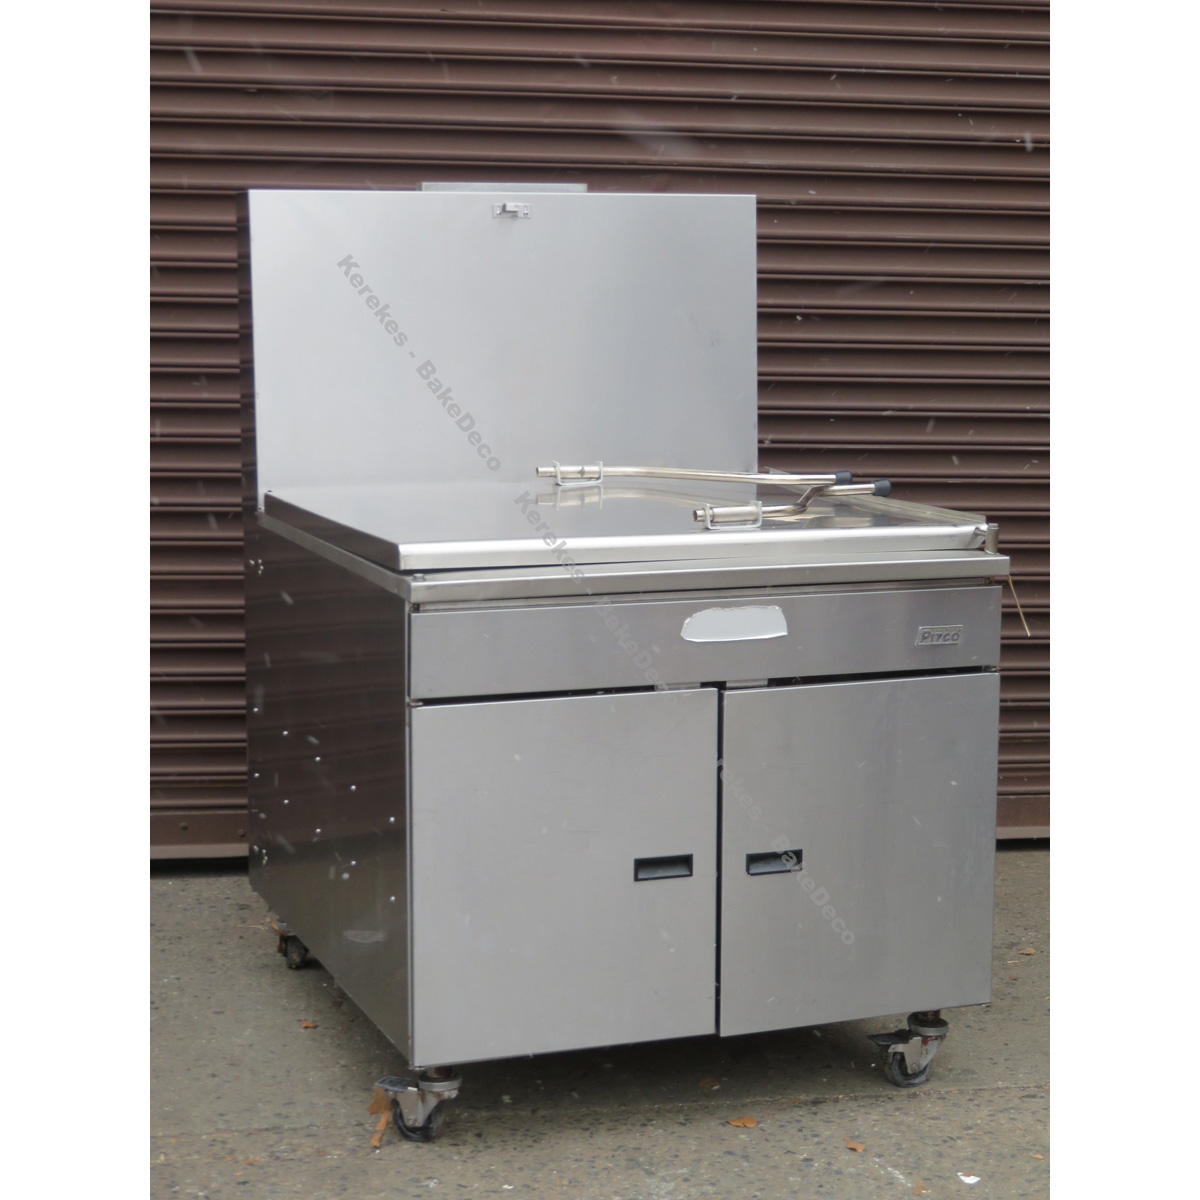 Pitco 34" Donut Fryer Model 34P Natural Gas, Used Excellent Condition image 2